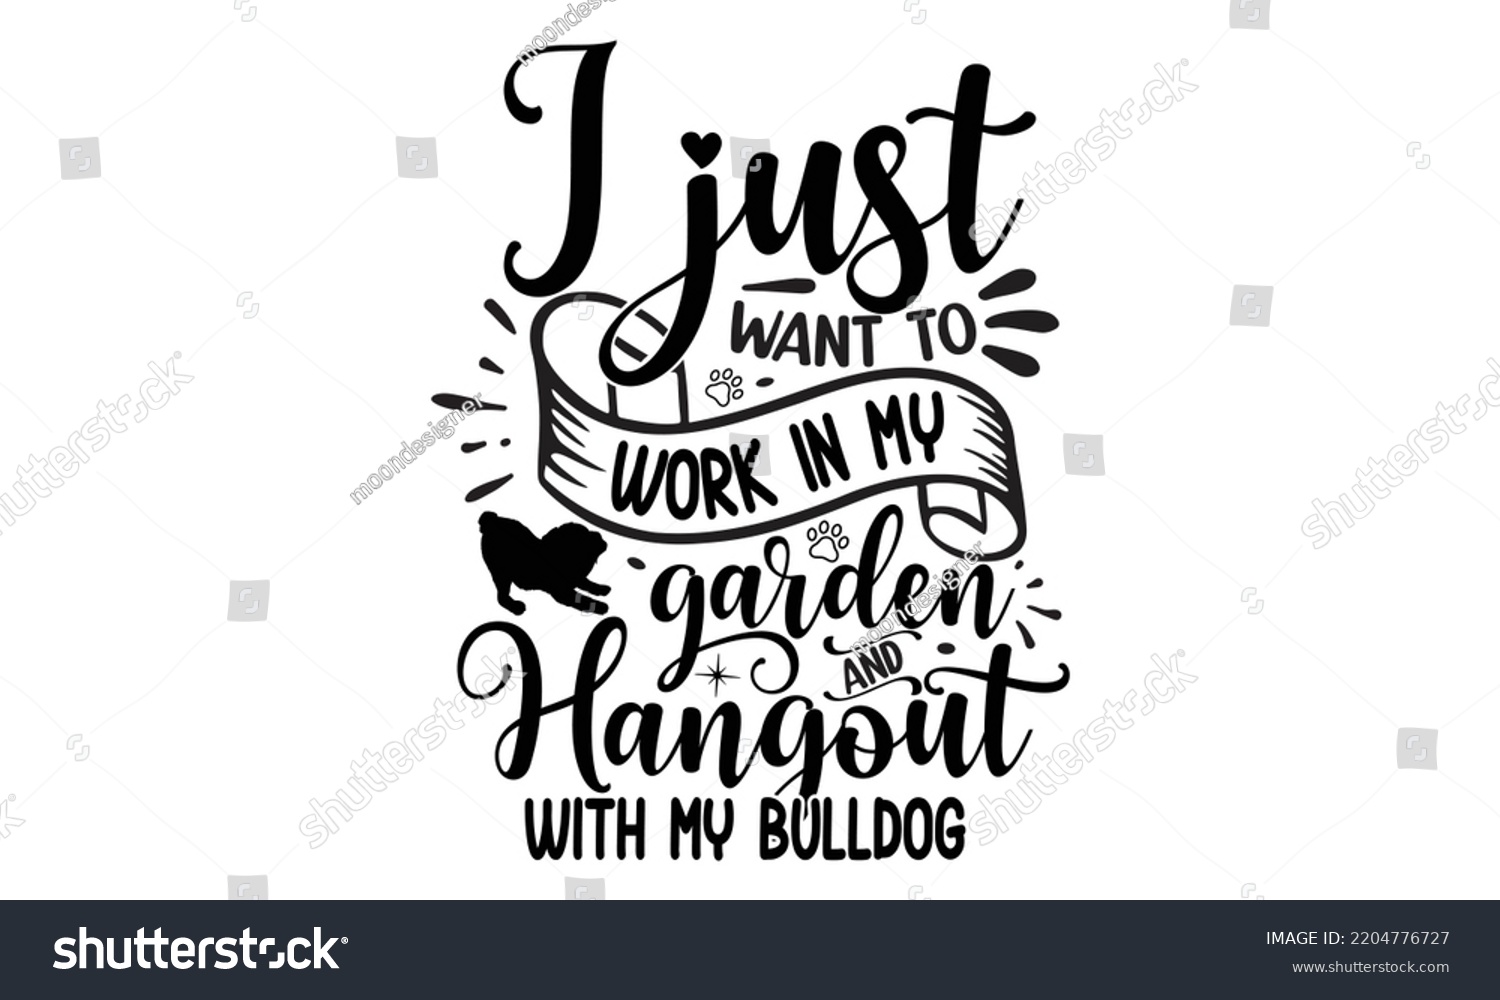 SVG of I just want to work in my garden and hangout with my bulldog- Bullodog T-shirt and SVG Design,  Dog lover t shirt design gift for women, typography design, can you download this Design, svg Files for  svg